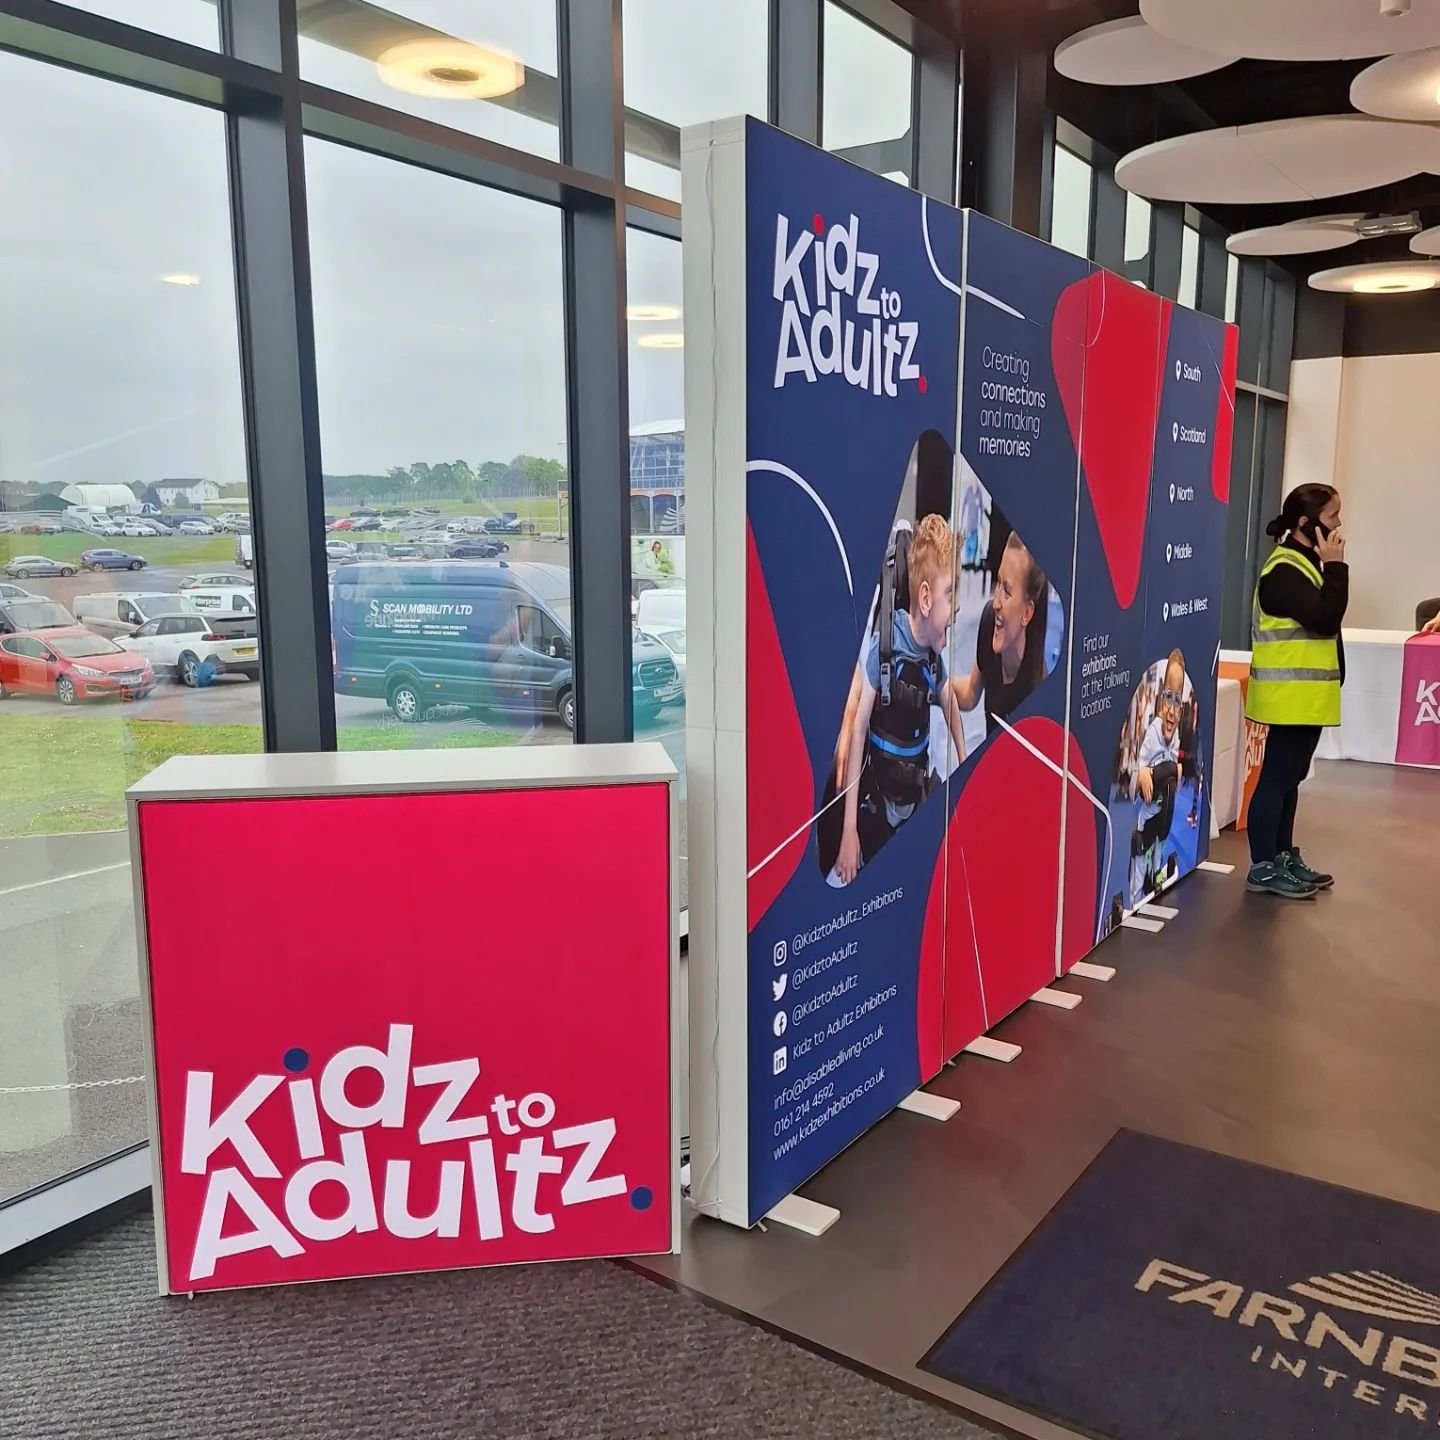 Team day out to @kidztoadultz_exhibition 🥳

It was great to see so many brilliant pieces of equipment and speak to lots of amazing people!

Including some of our own families and colleagues we work alongside!

And to finish off ... some go karting!
